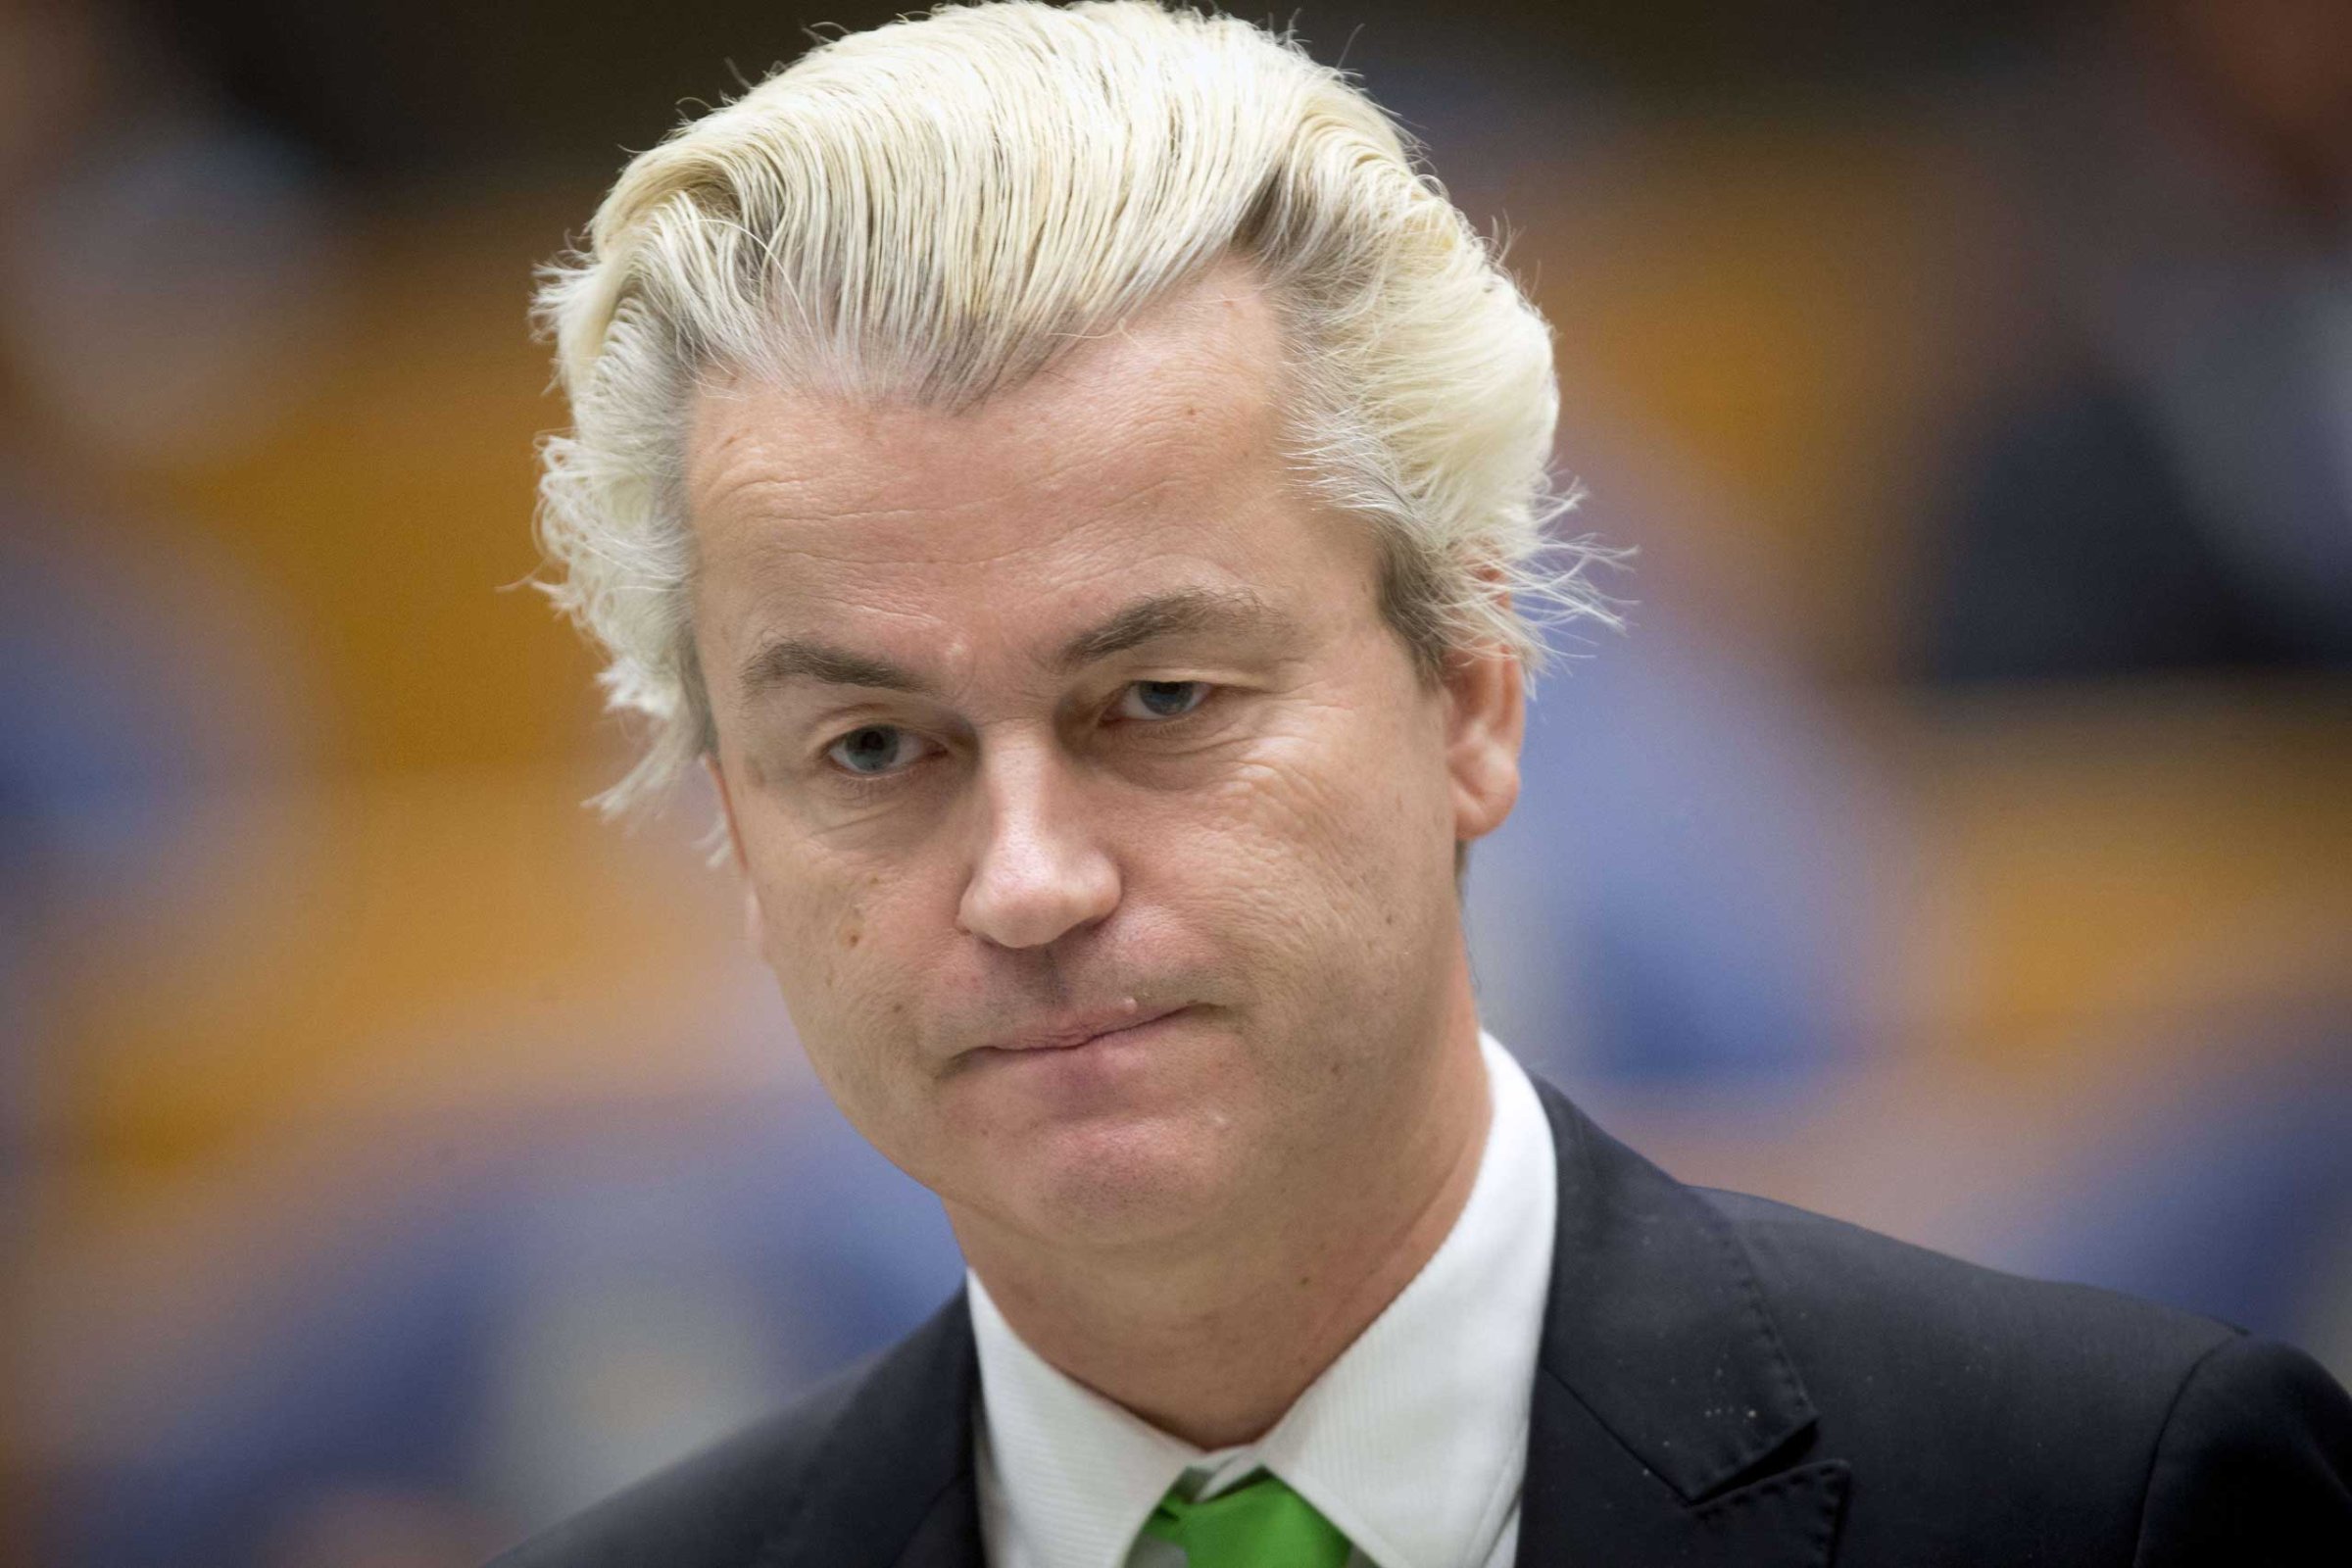 Dutch far-right wing PVV-leader Geert Wilders stands at the Parliament building in The Hague, The Netherlands, on Dec. 18, 2014.